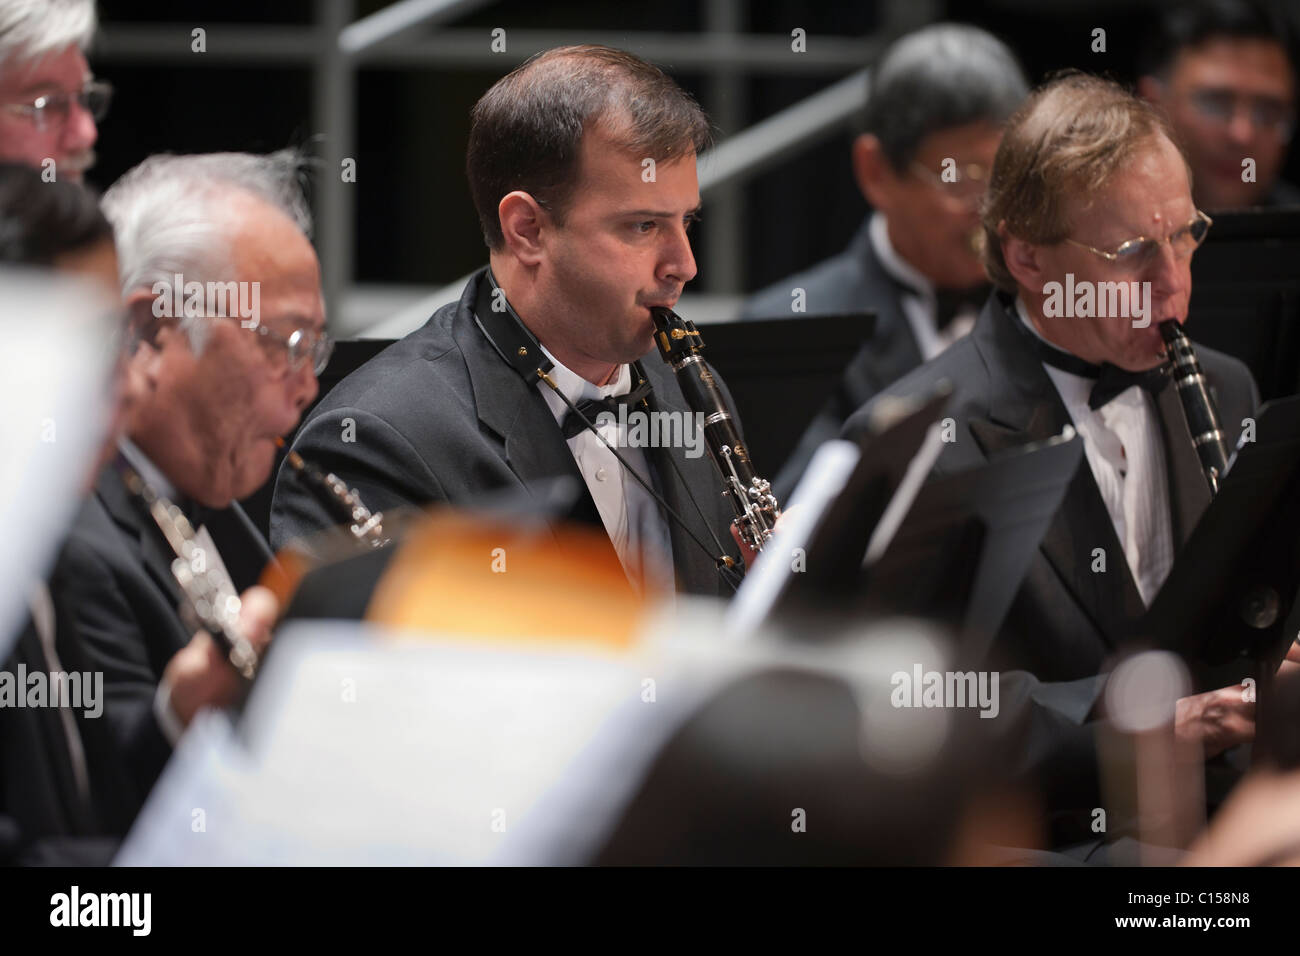 Clarinets and oboe in performance of classical orchestra (MR). Stock Photo